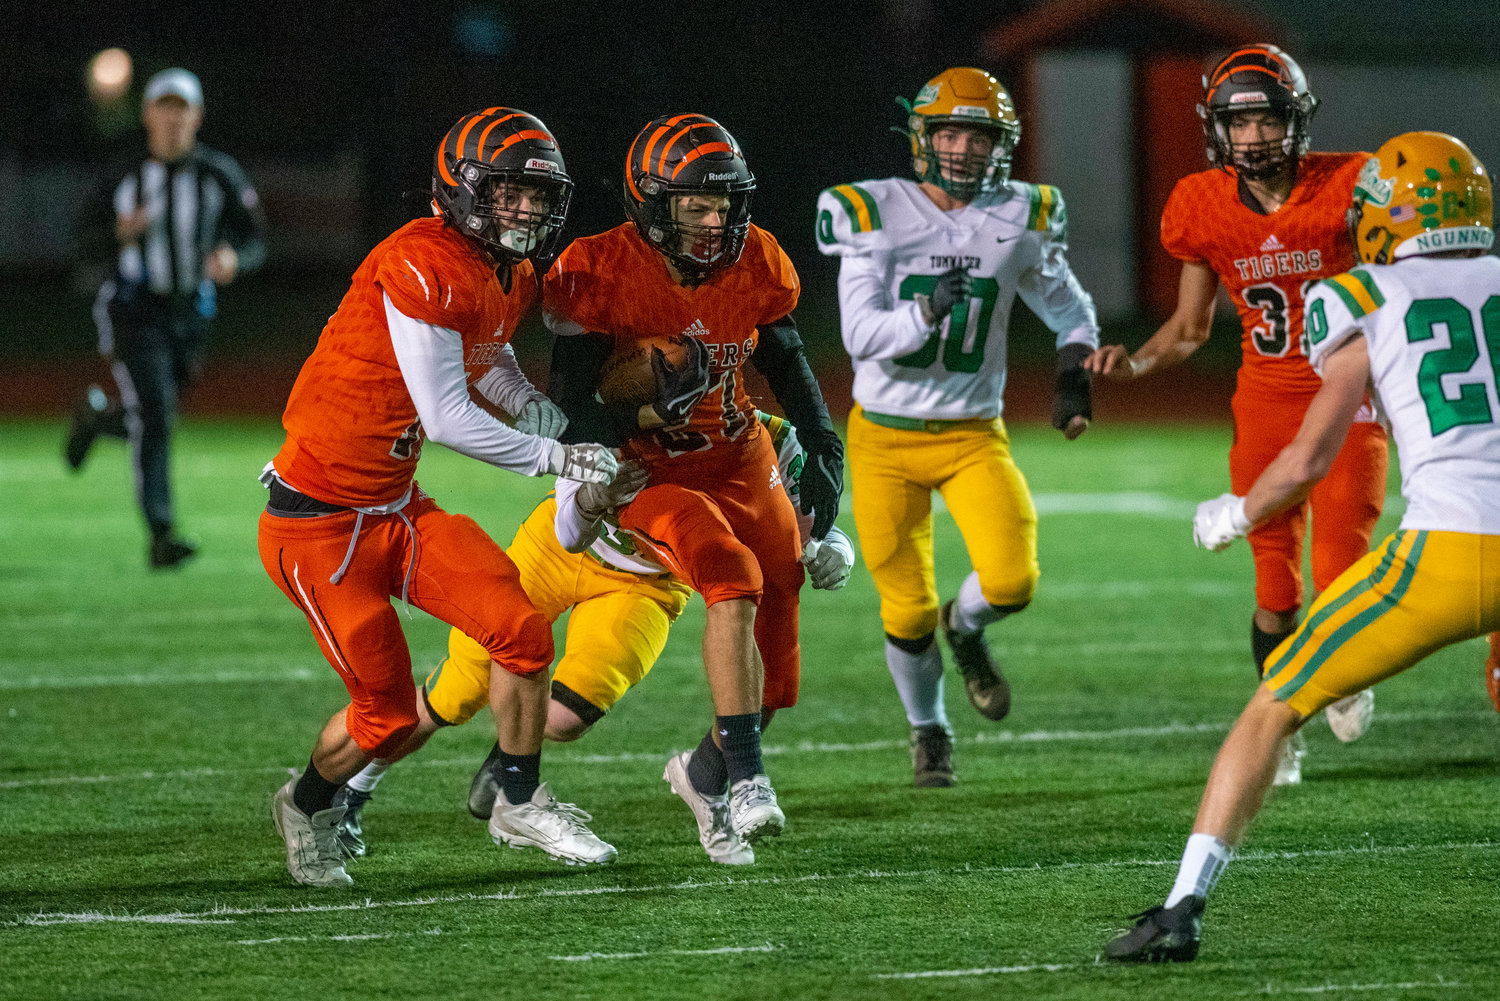 Centralia running back Anthony Saucedo (27) looks for running room at home against Tumwater Oct. 29.